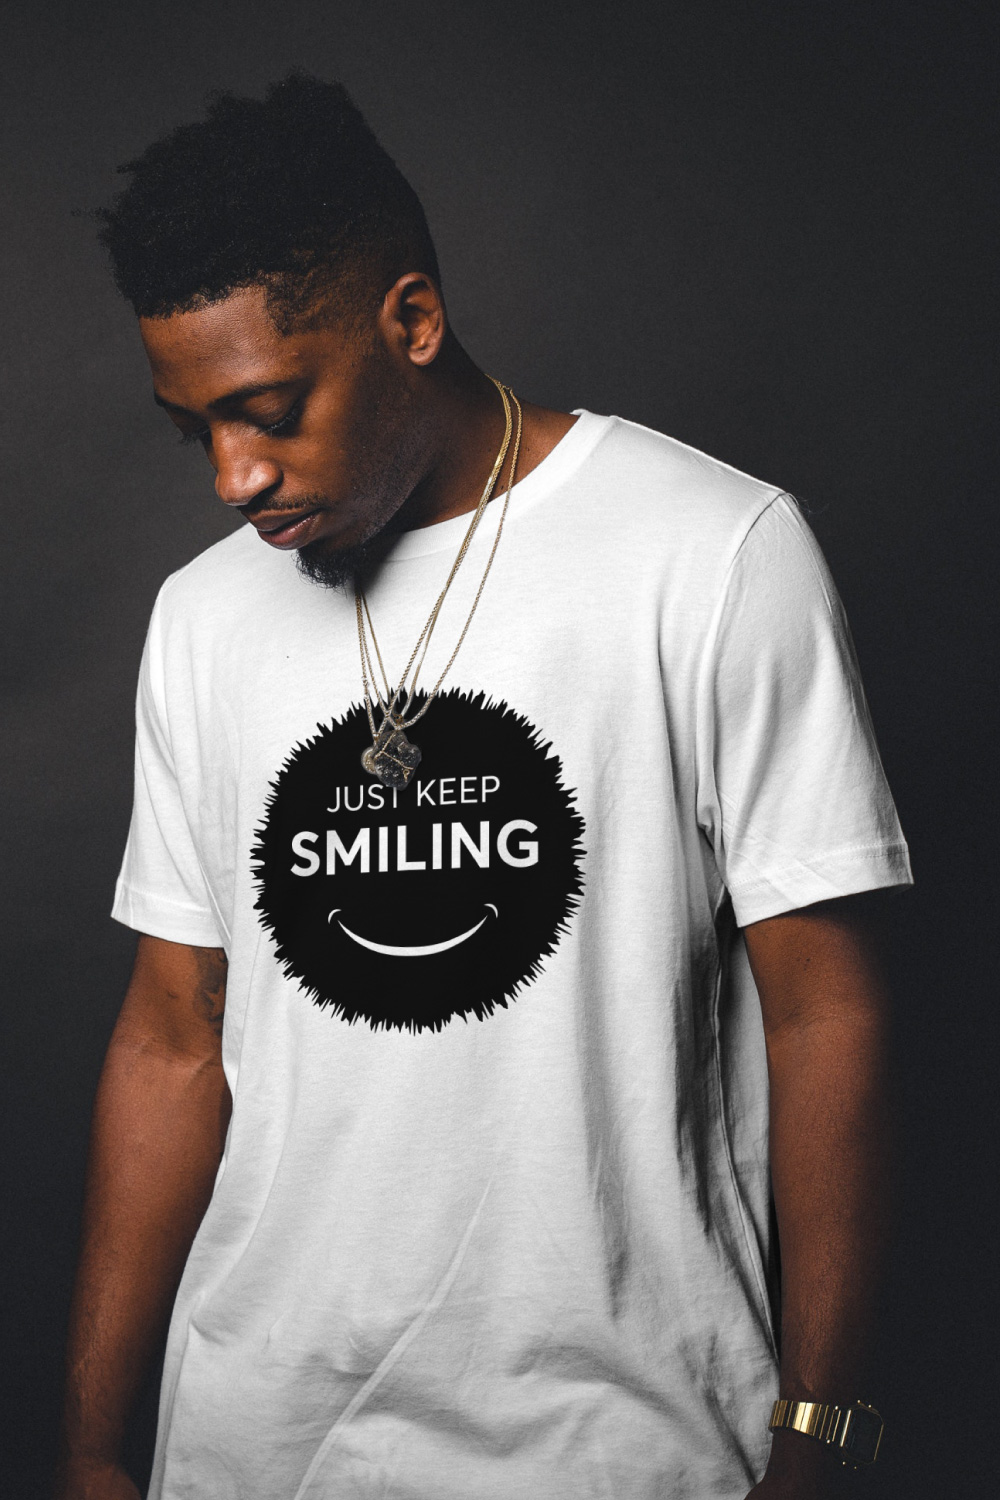 Just keep smiling tshirt design pinterest preview image.